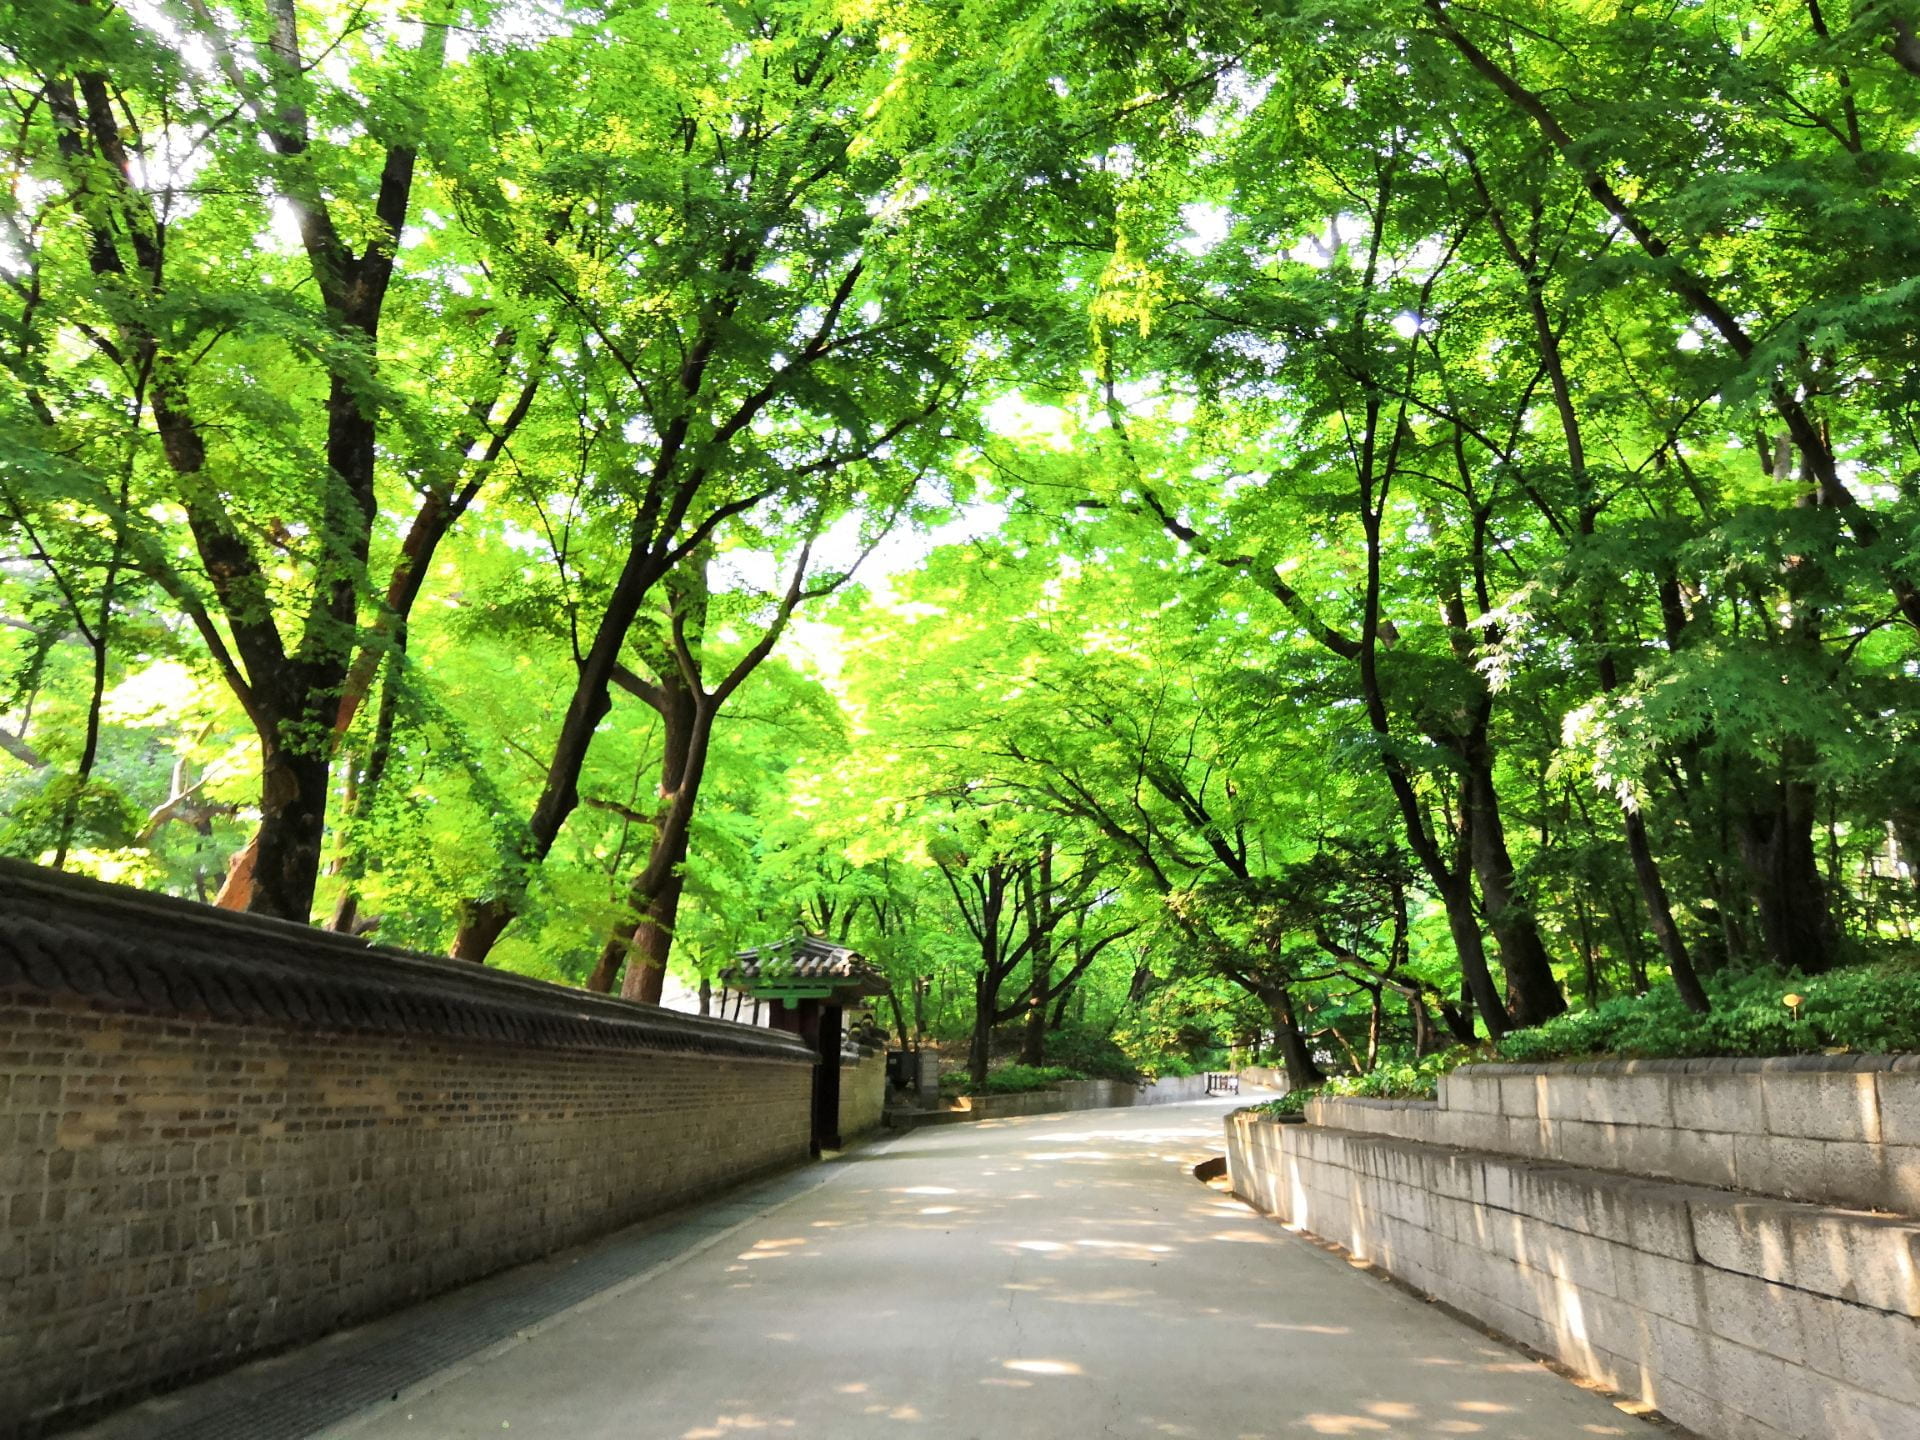 area outside the walls of a shrine in South Korea with a lot of greenery